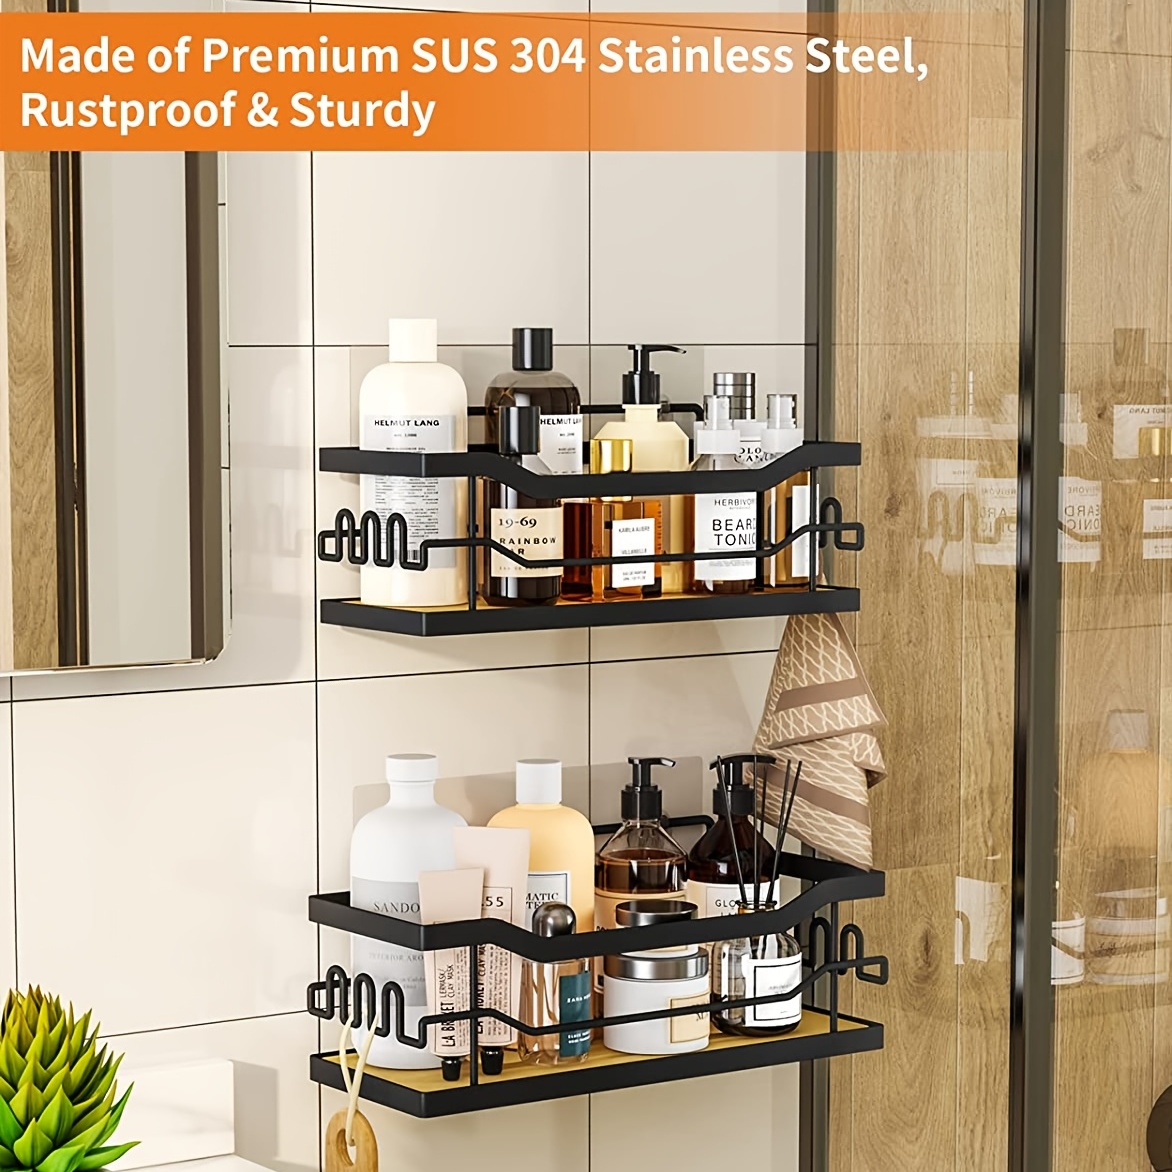 Cubilan Wall Mount Adhesive Stainless Steel Corner Shower Caddy Organizer  Shelf with 8 hooks in Matte Black 2-Pack HD-36P - The Home Depot